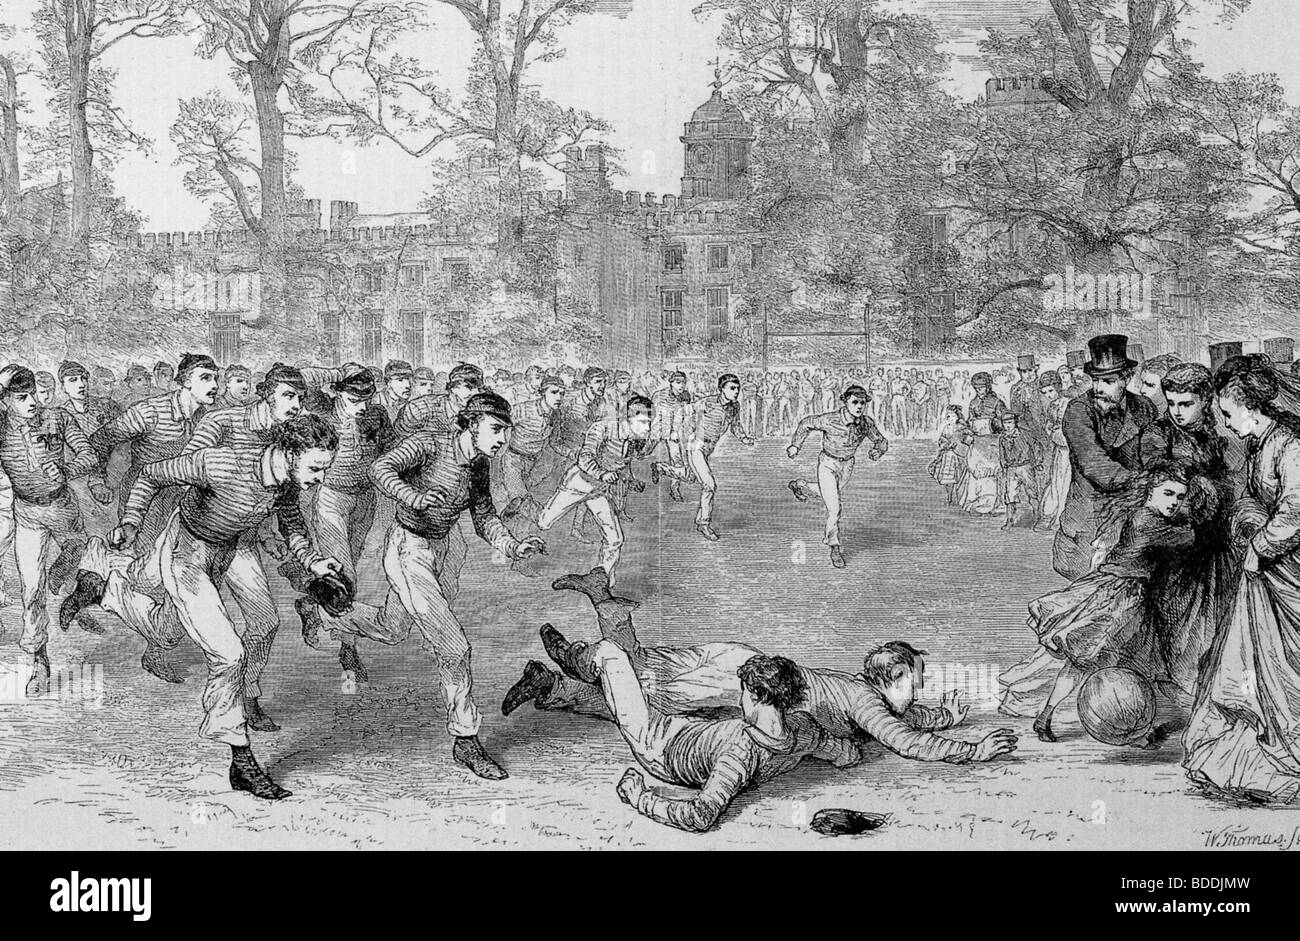 RUGBY  'The Rugby game as it is played at Rugby School' according to the The Graphic magazine in 1870 Stock Photo